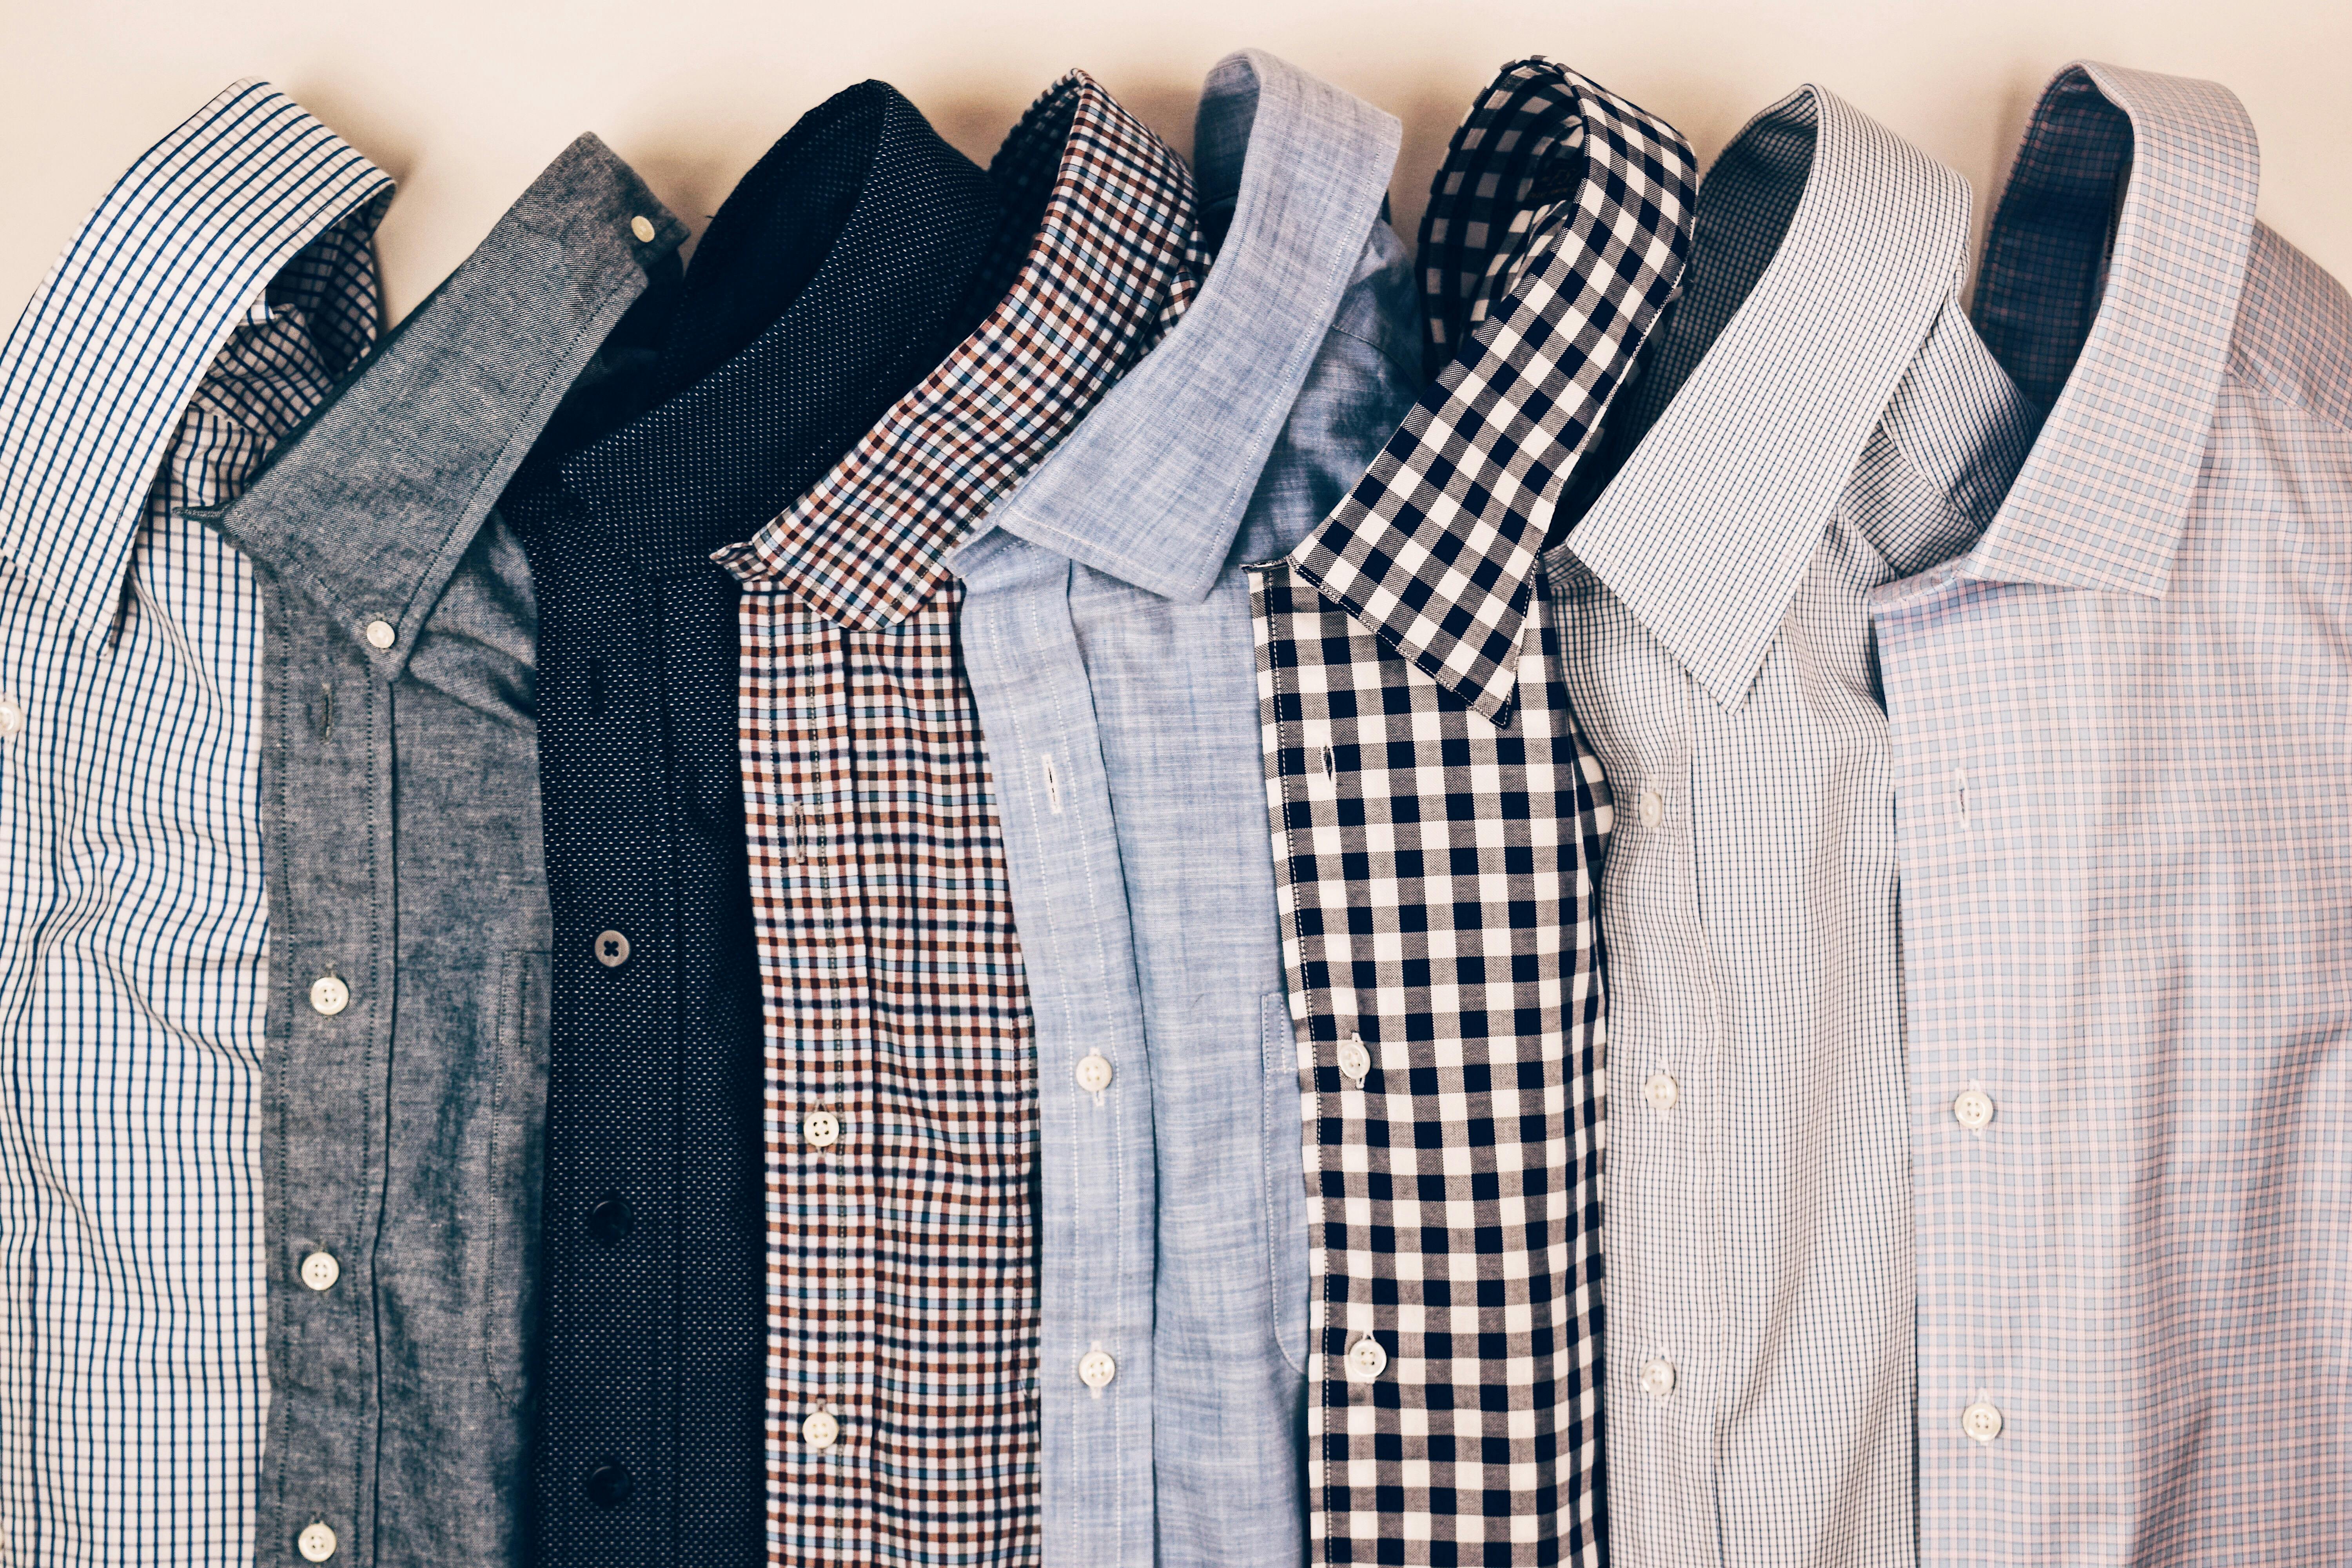 photograph of mens shirts folded and lined up in a row